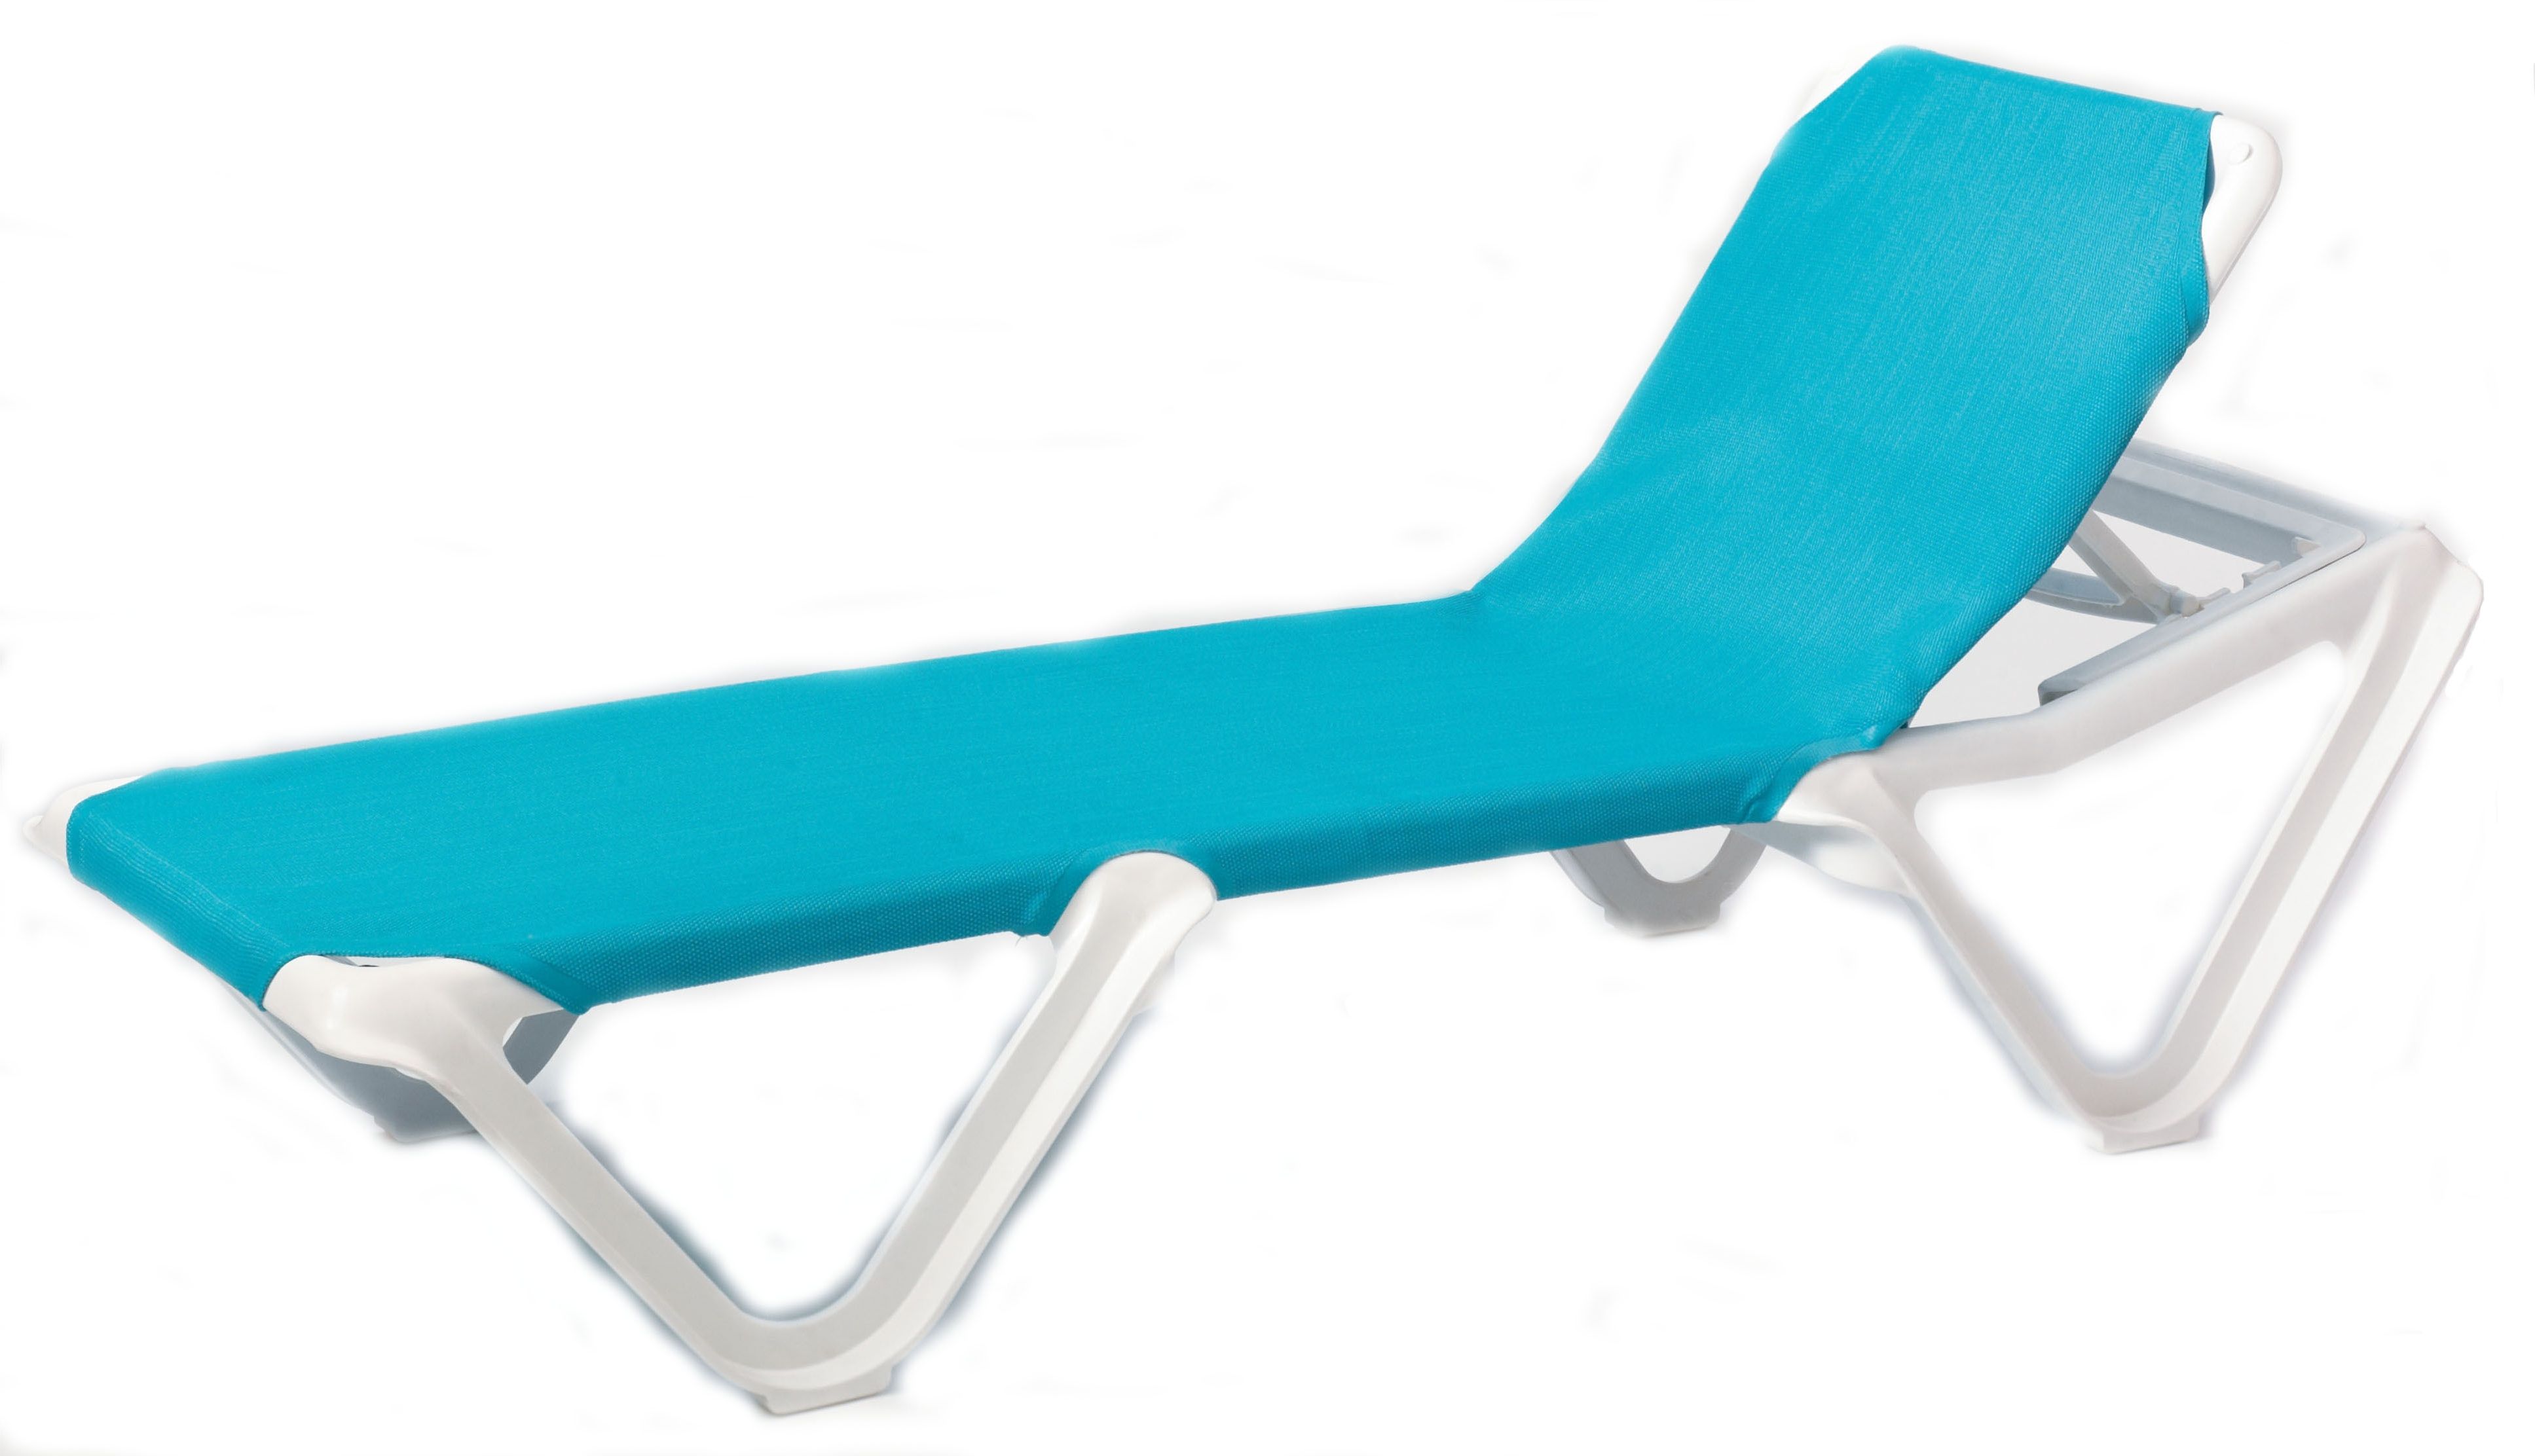 Atlanta Chaise Lounge Chairs With Regard To Latest Enjoy The Sunshine Well Through Pool Chaise Lounge Chairs (View 10 of 15)